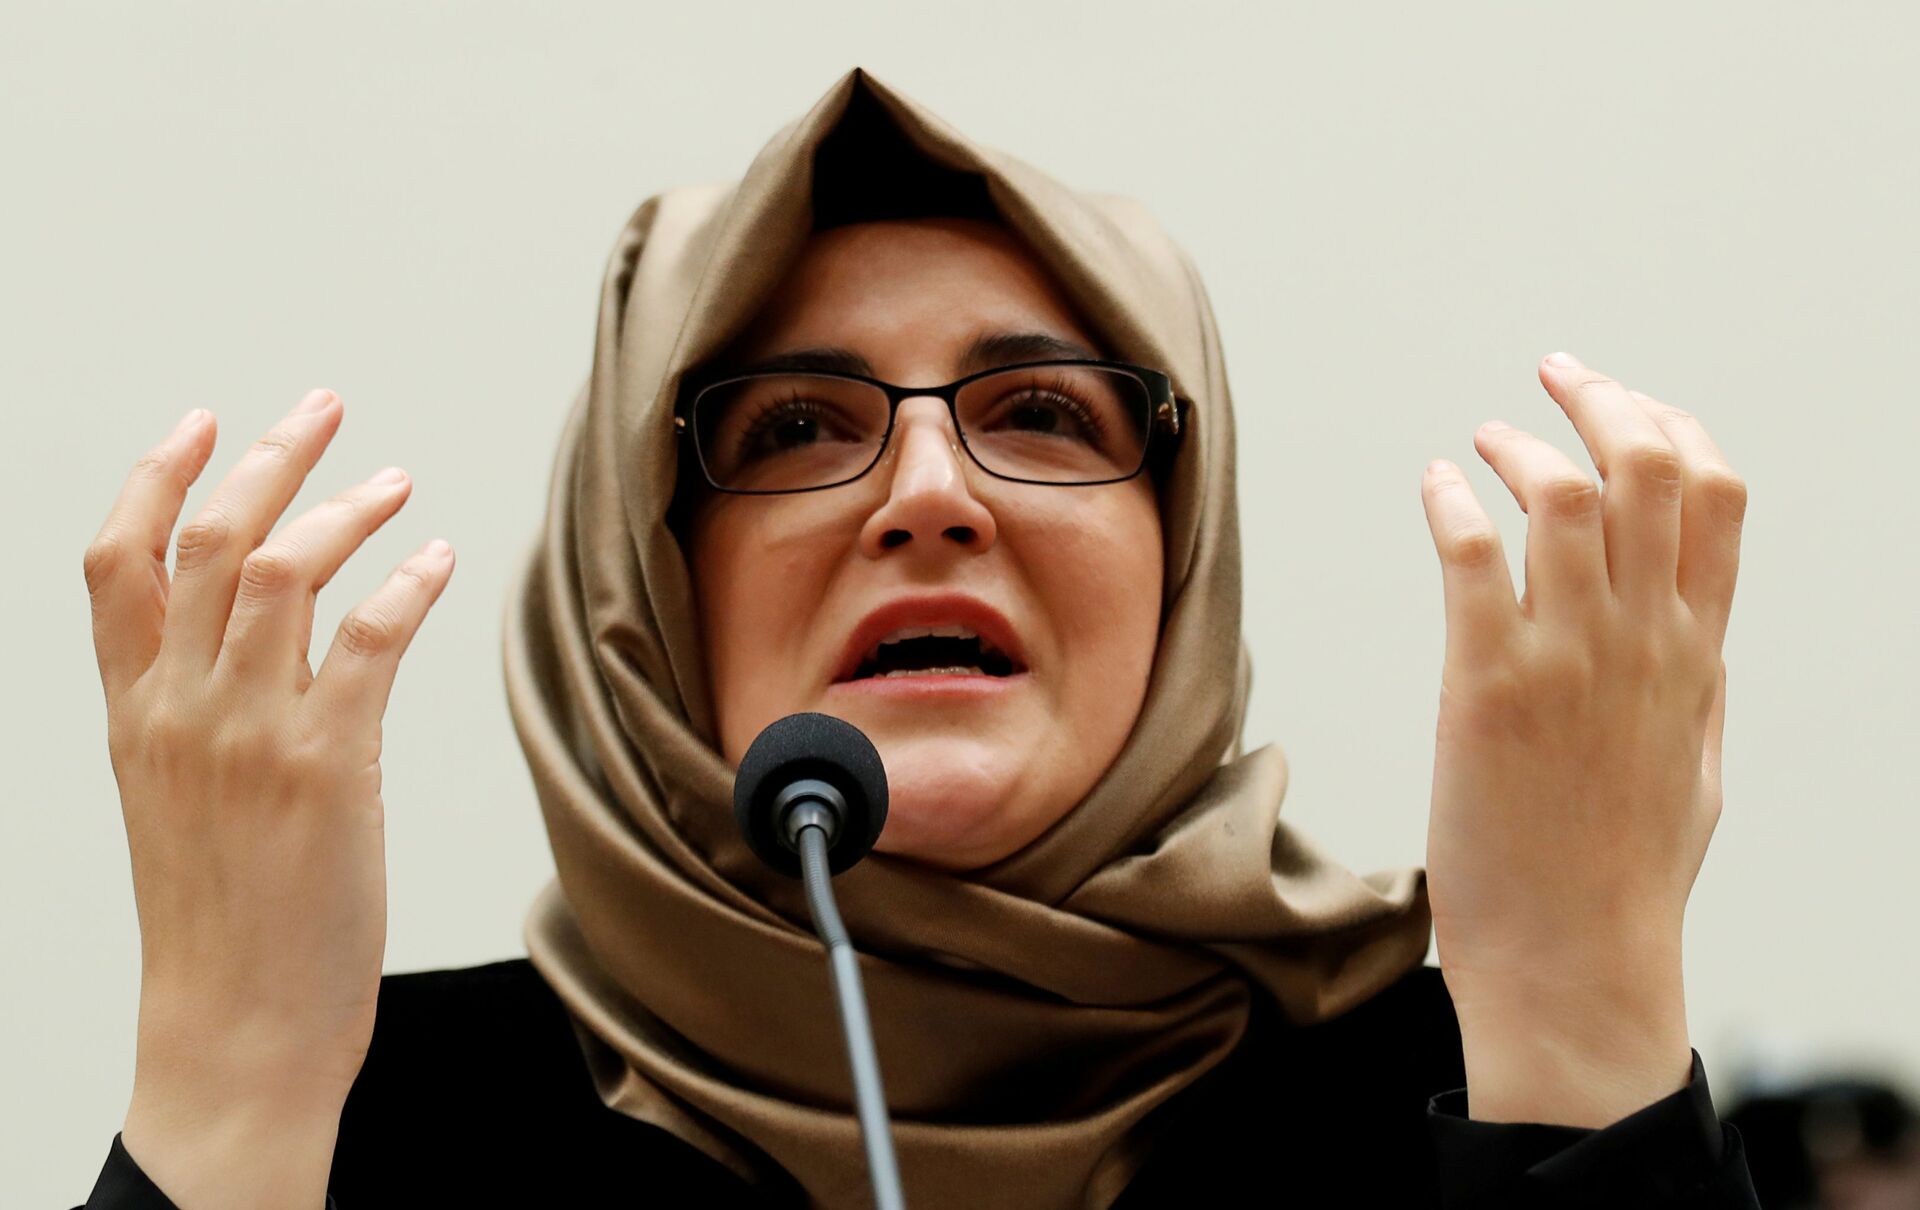  Hatice Cengiz, fiancee of murdered journalist Jamal Khashoggi, testifies before a House Foreign Affairs Subcommittee hearing on The Dangers of Reporting on Human Rights on Capitol Hill in Washington U.S., May 16, 2019 - Sputnik International, 1920, 07.09.2021